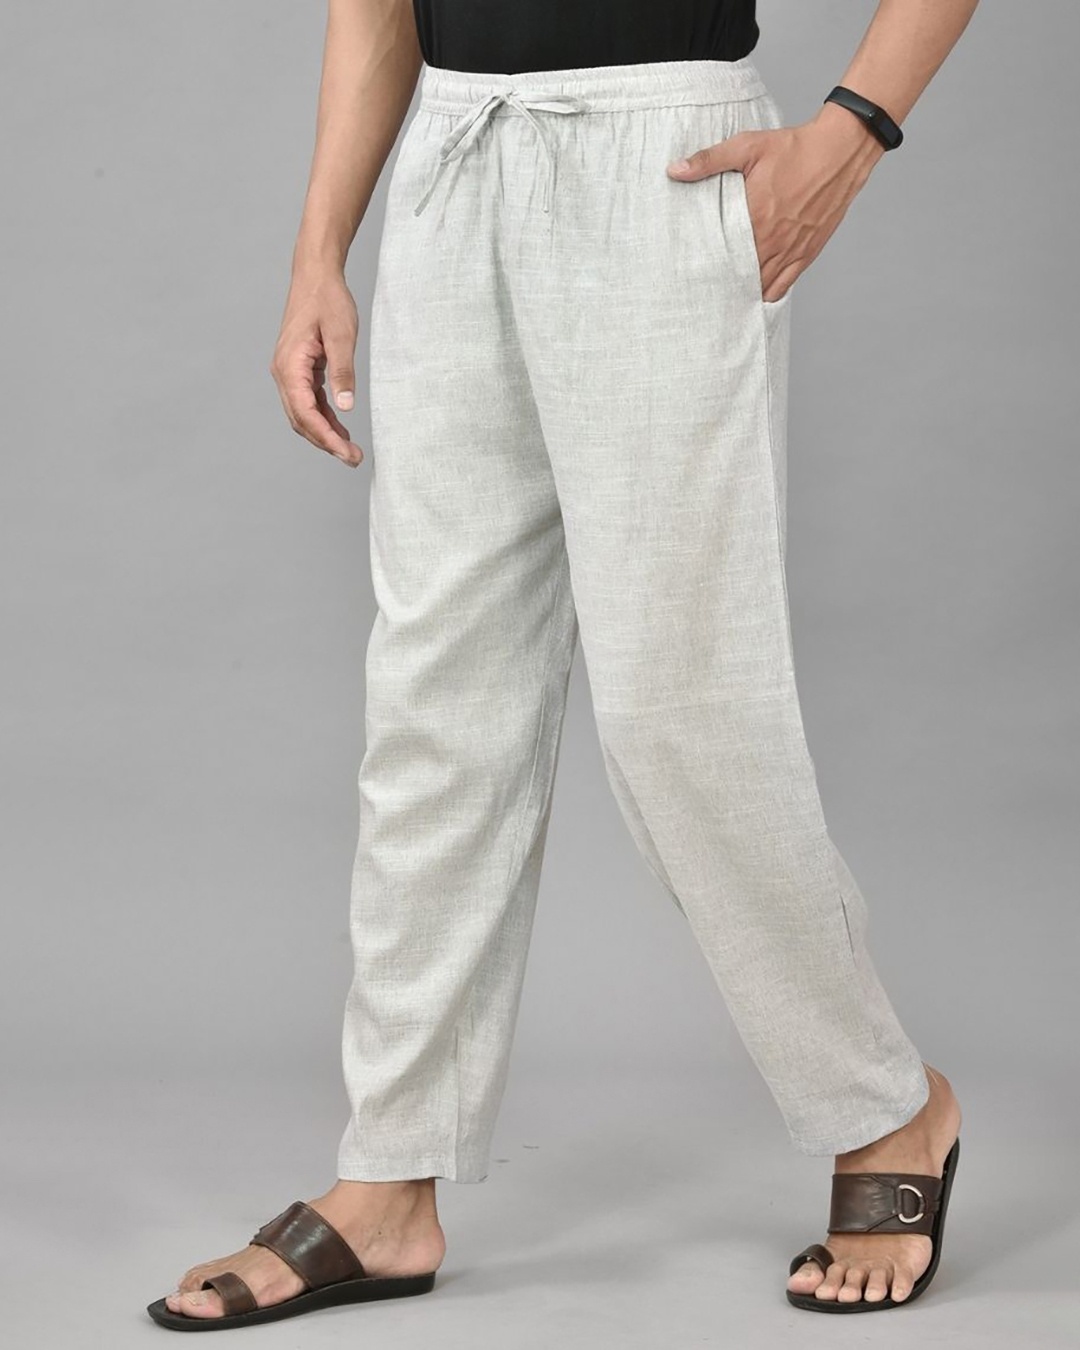 Cotton Mens Casual Pants Feature  Breath Taking Look Shrink Resistance  Technics  Attractive Pattern at Rs 500  Piece in Kadapa